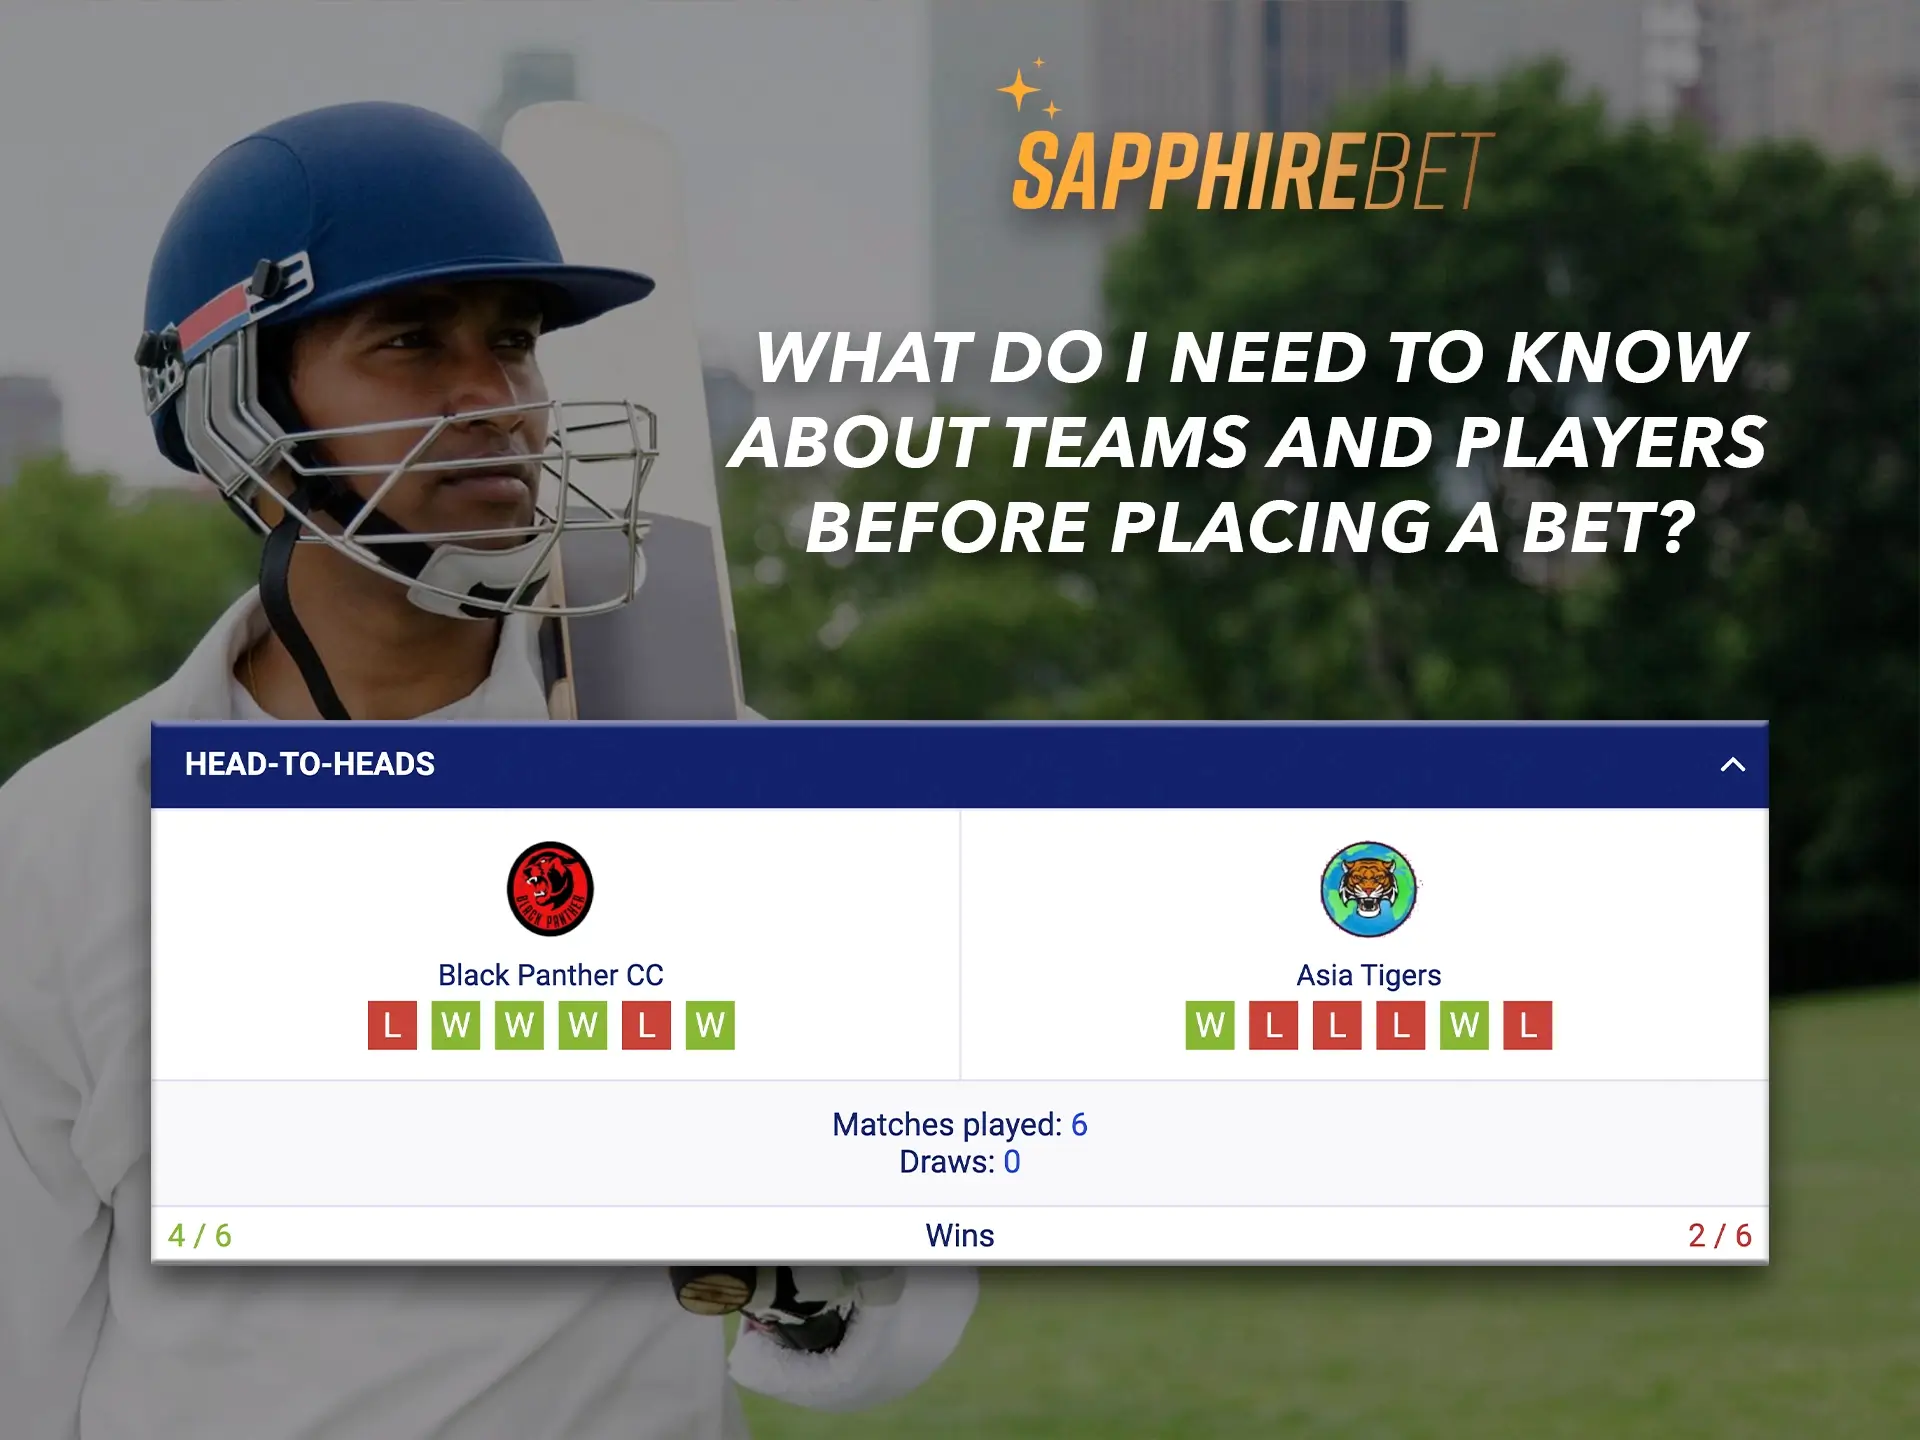 Sapphirebet lets you know all the statistics of past meetings between cricket teams.